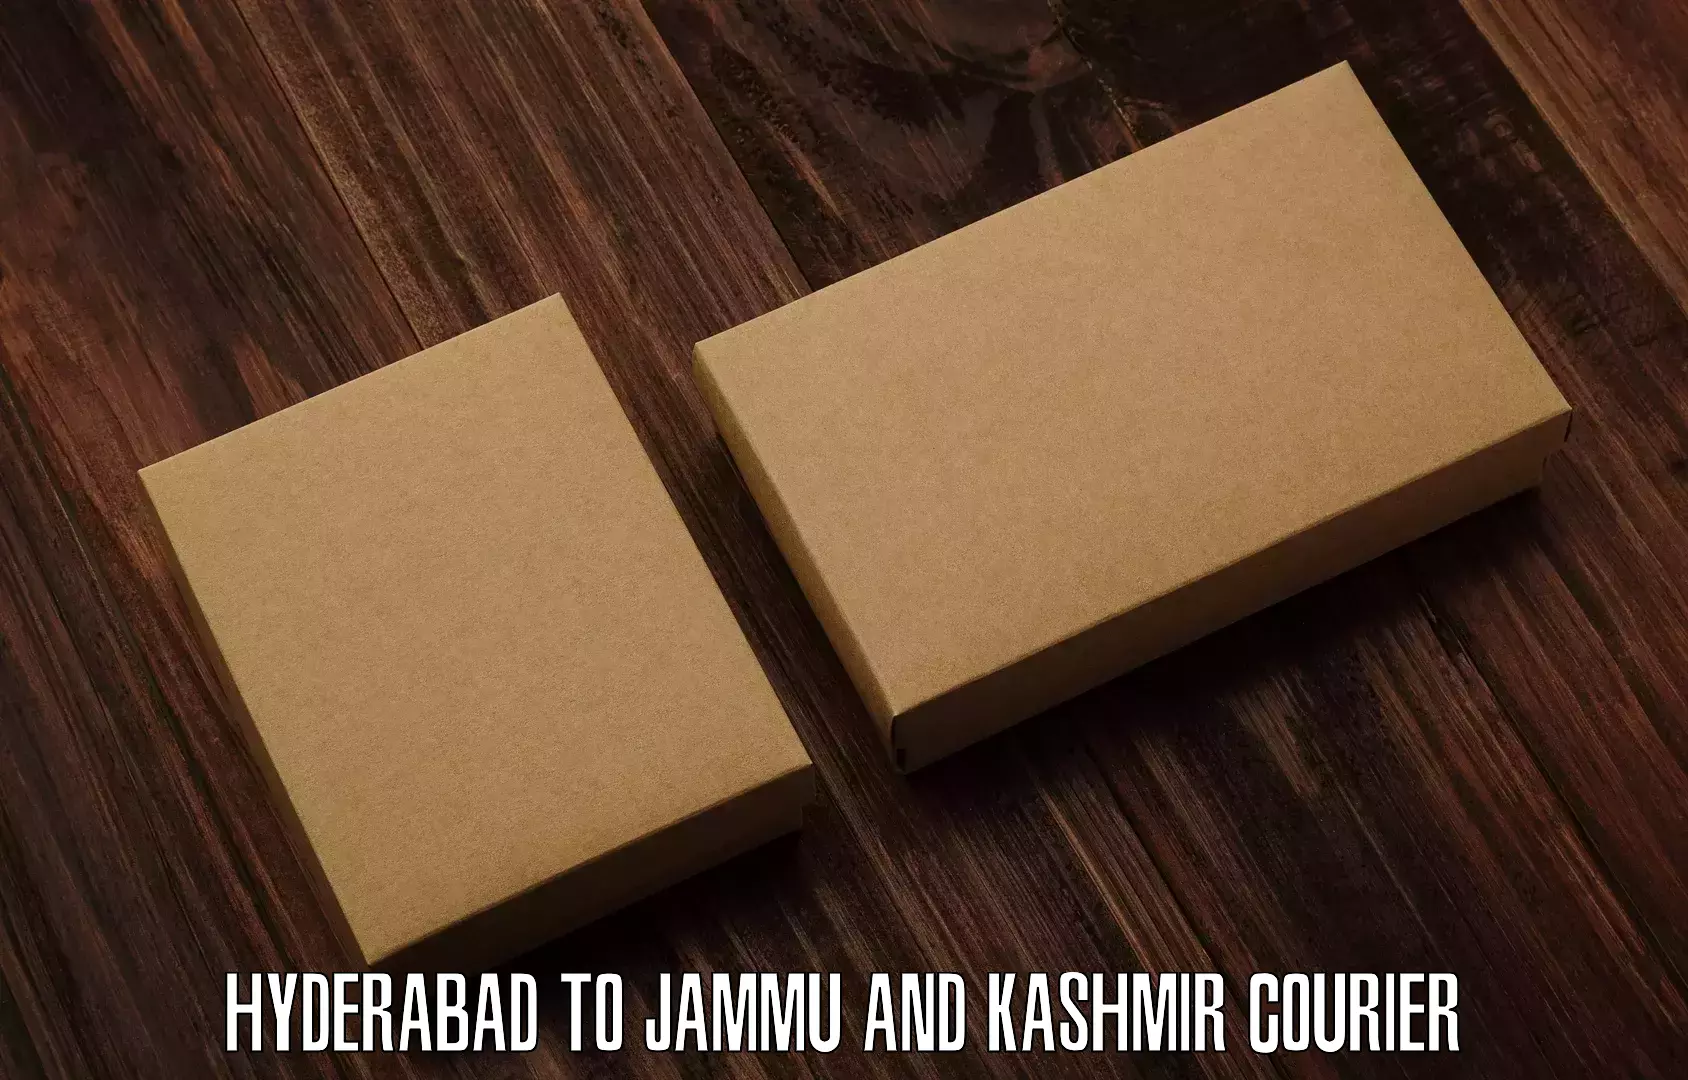 Nationwide courier service Hyderabad to Jammu and Kashmir